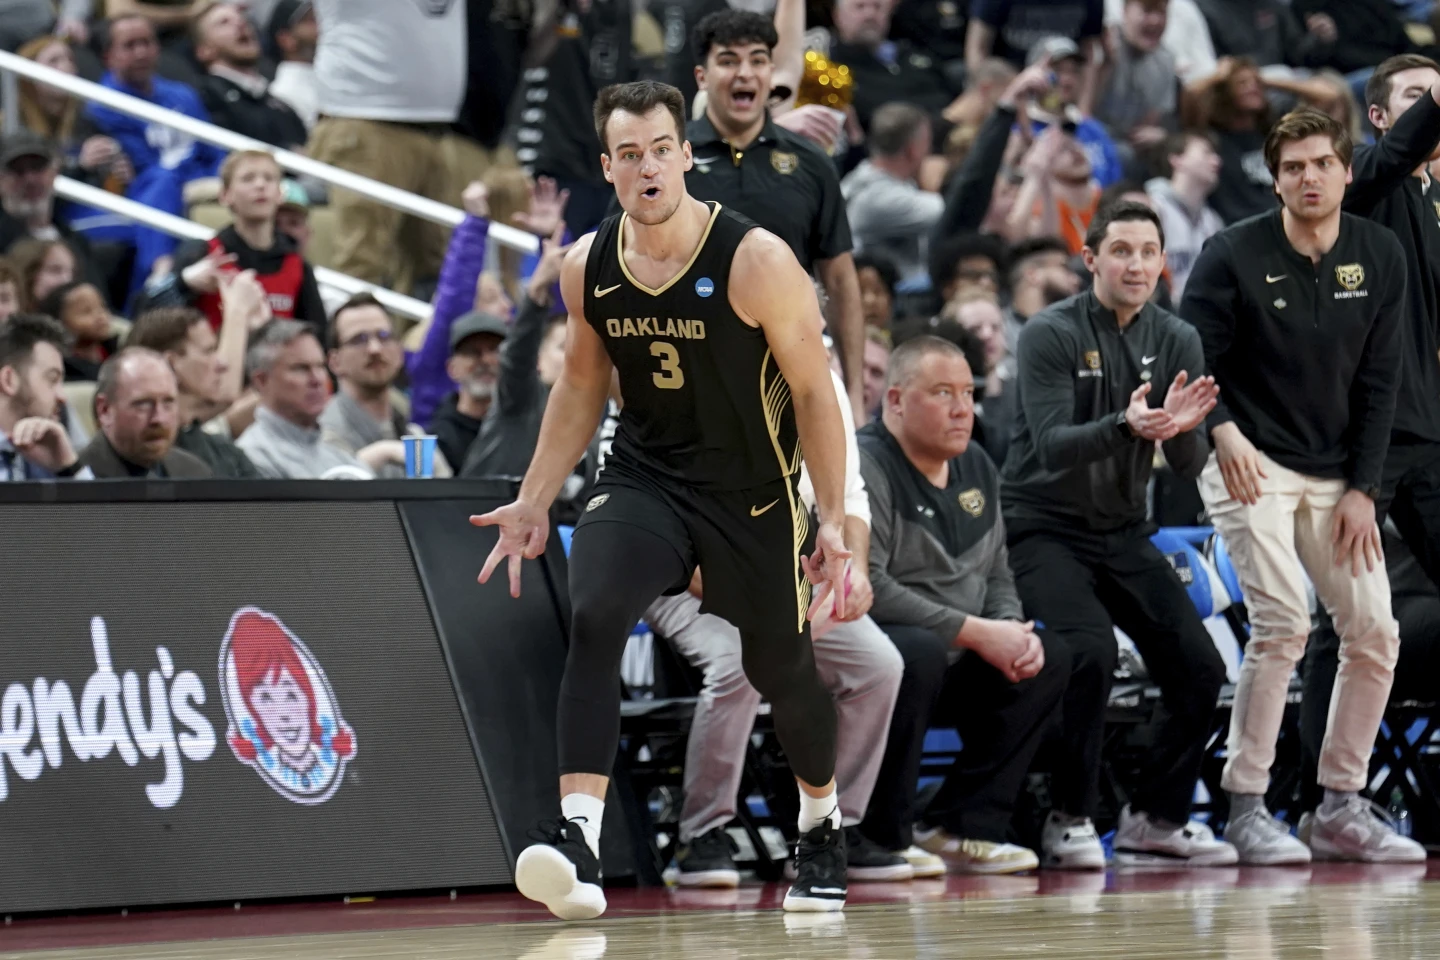 Gohlke nails10 3s as Oakland delivers first true shock of March Madness, beating Kentucky